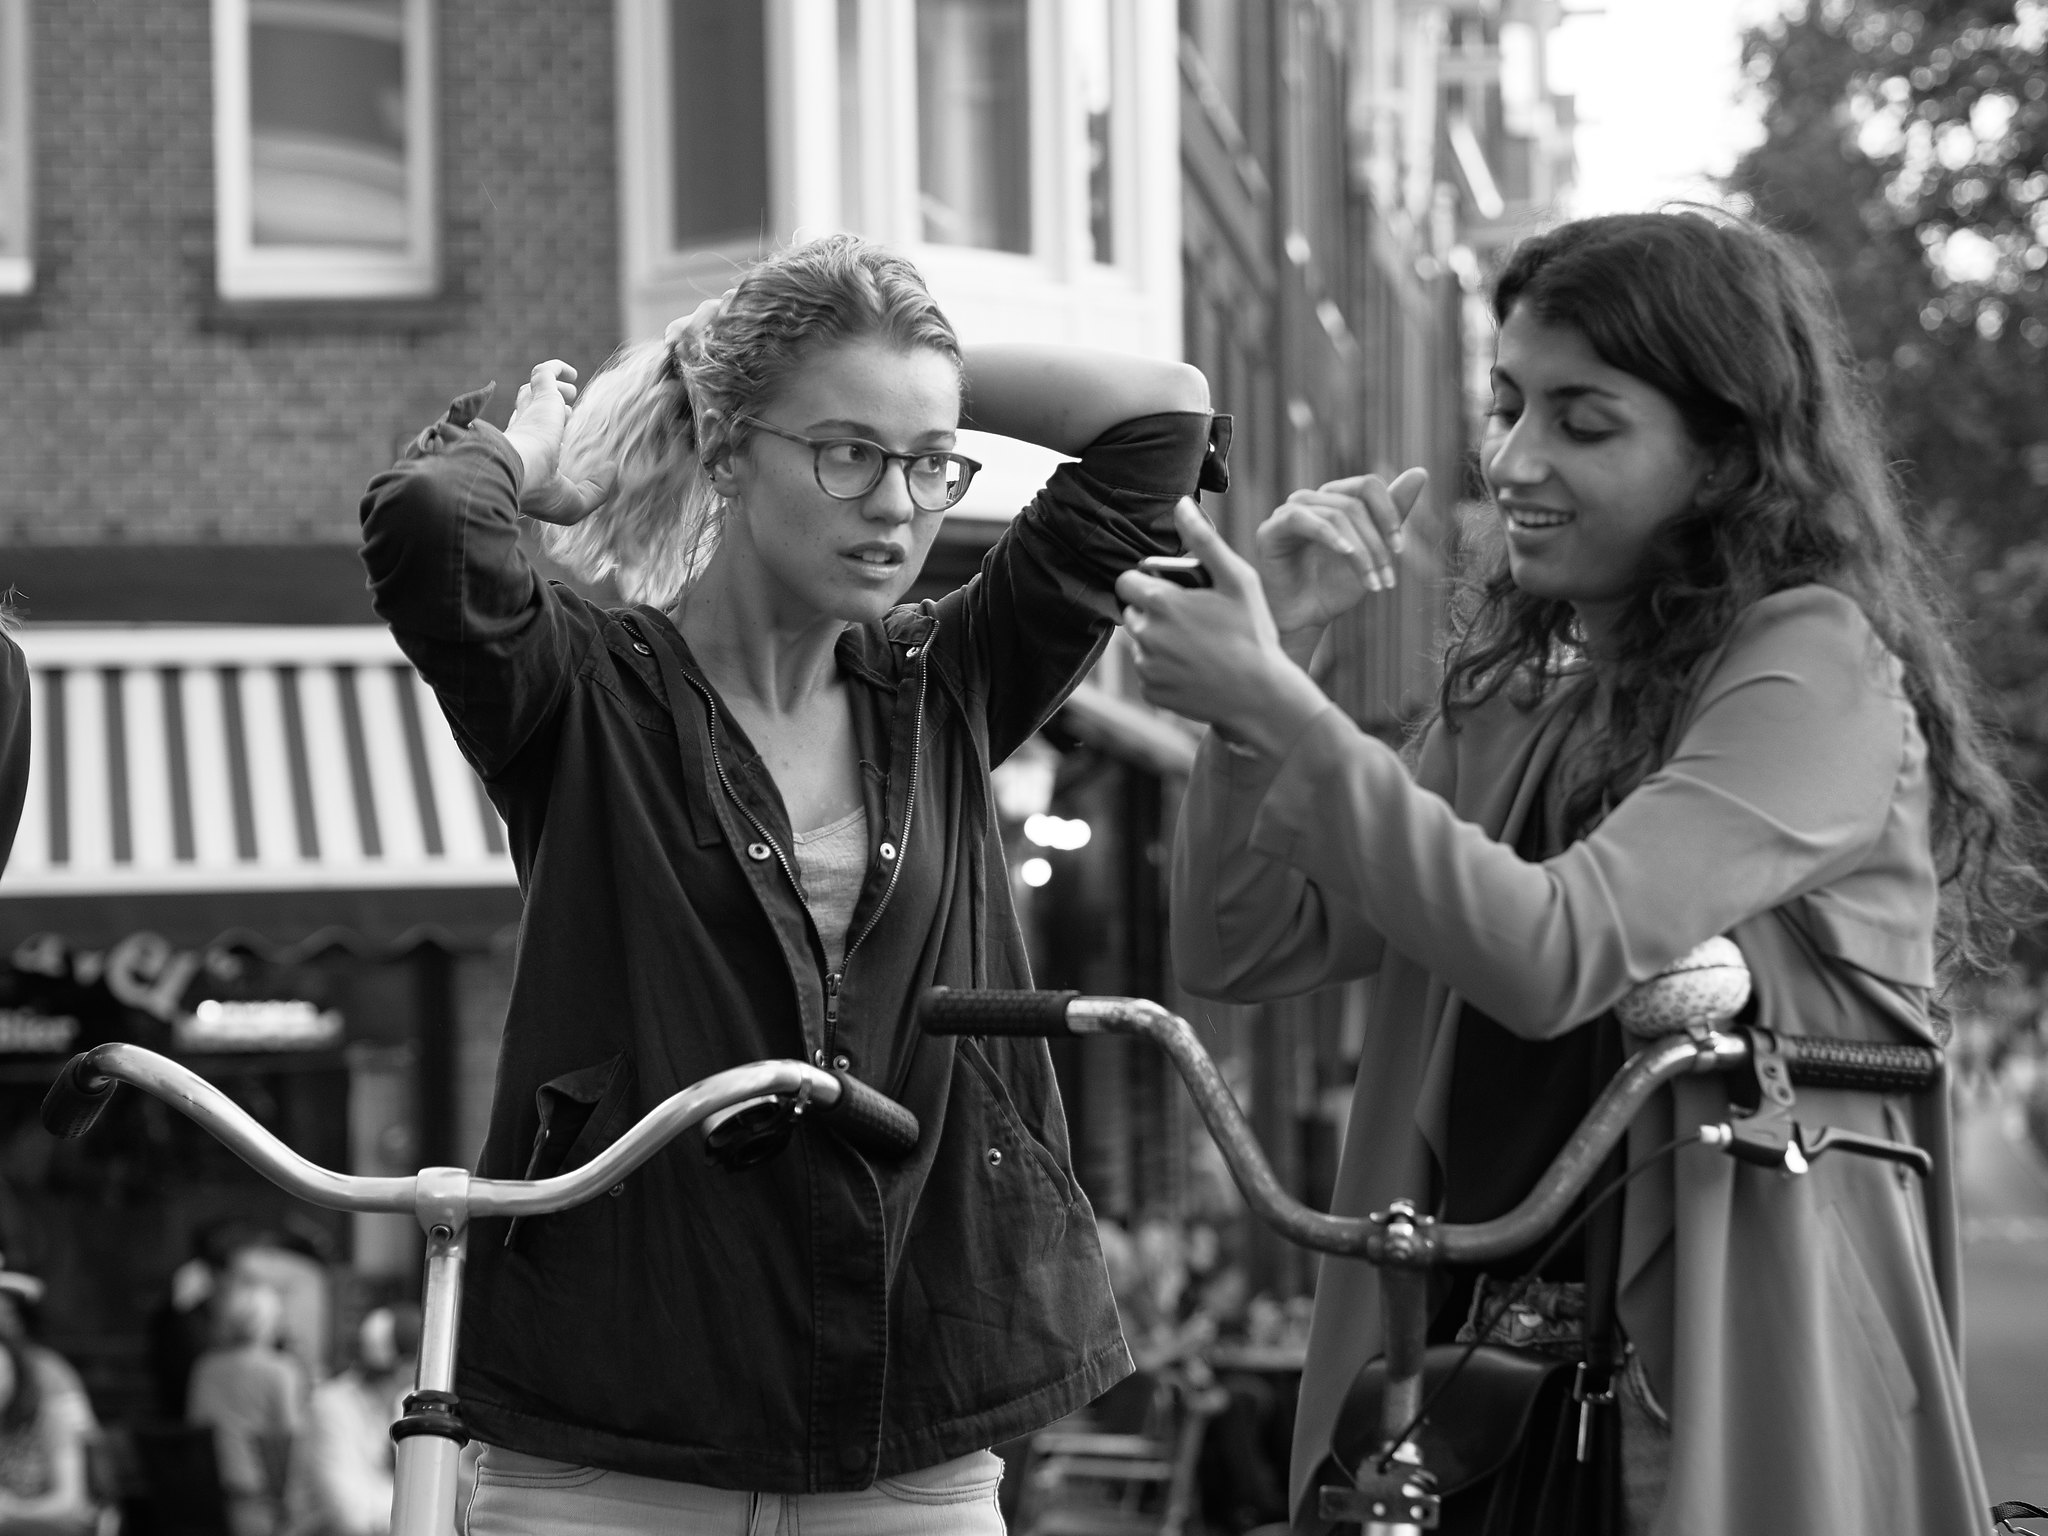 Two women stand with their bikes, one is signing and the other is putting up her hair.